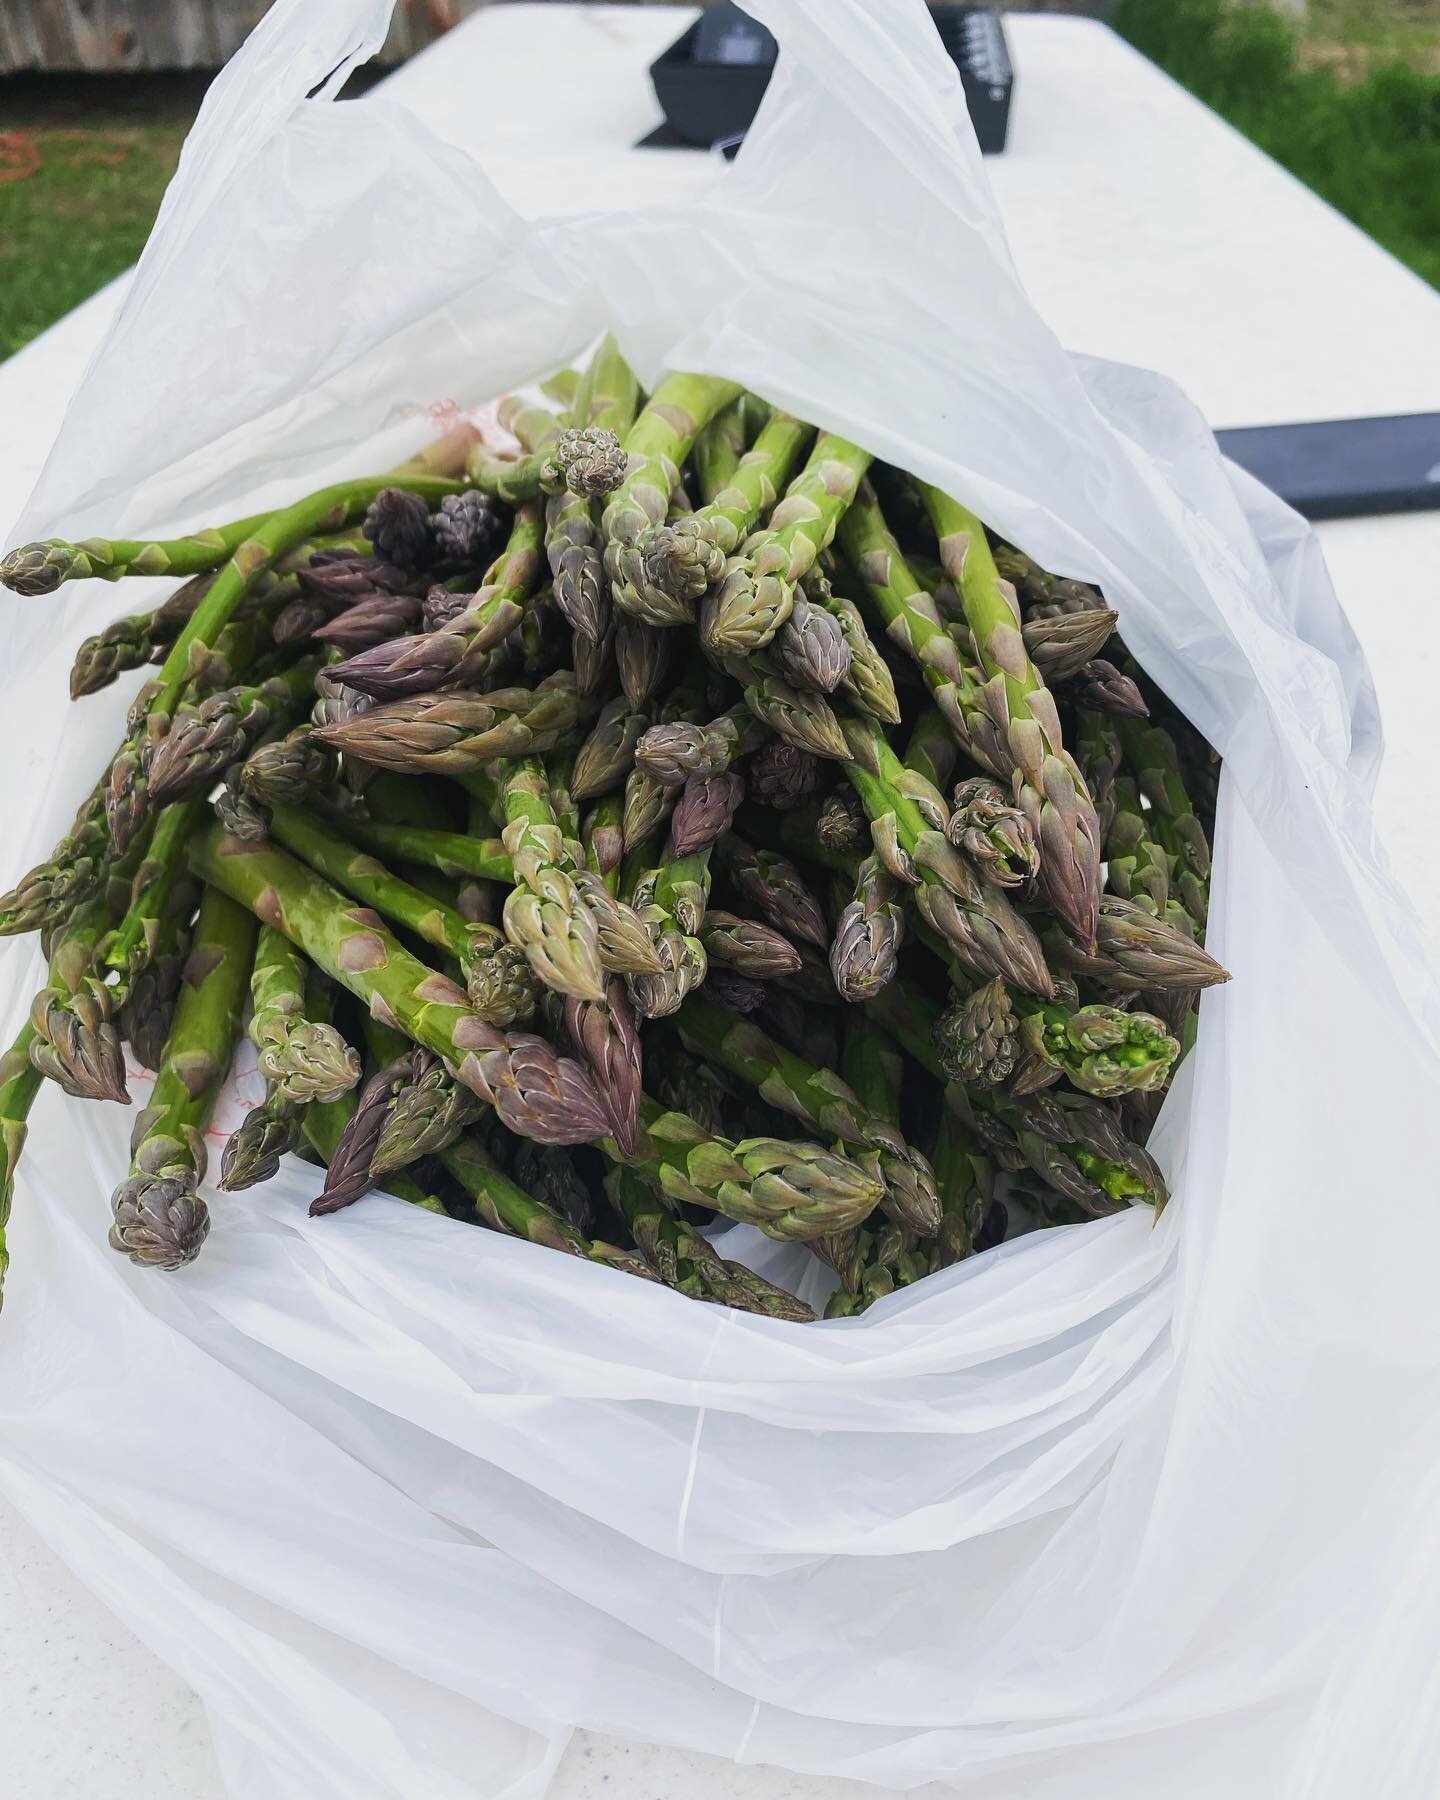 We have asparagus! It has been awhile since we have had fresh asparagus for a sale but our new bed is finally catching up! Woot woot!

It&rsquo;s just beginning but it&rsquo;s selling fast this weekend. 

If you&rsquo;d like some you can message me, 